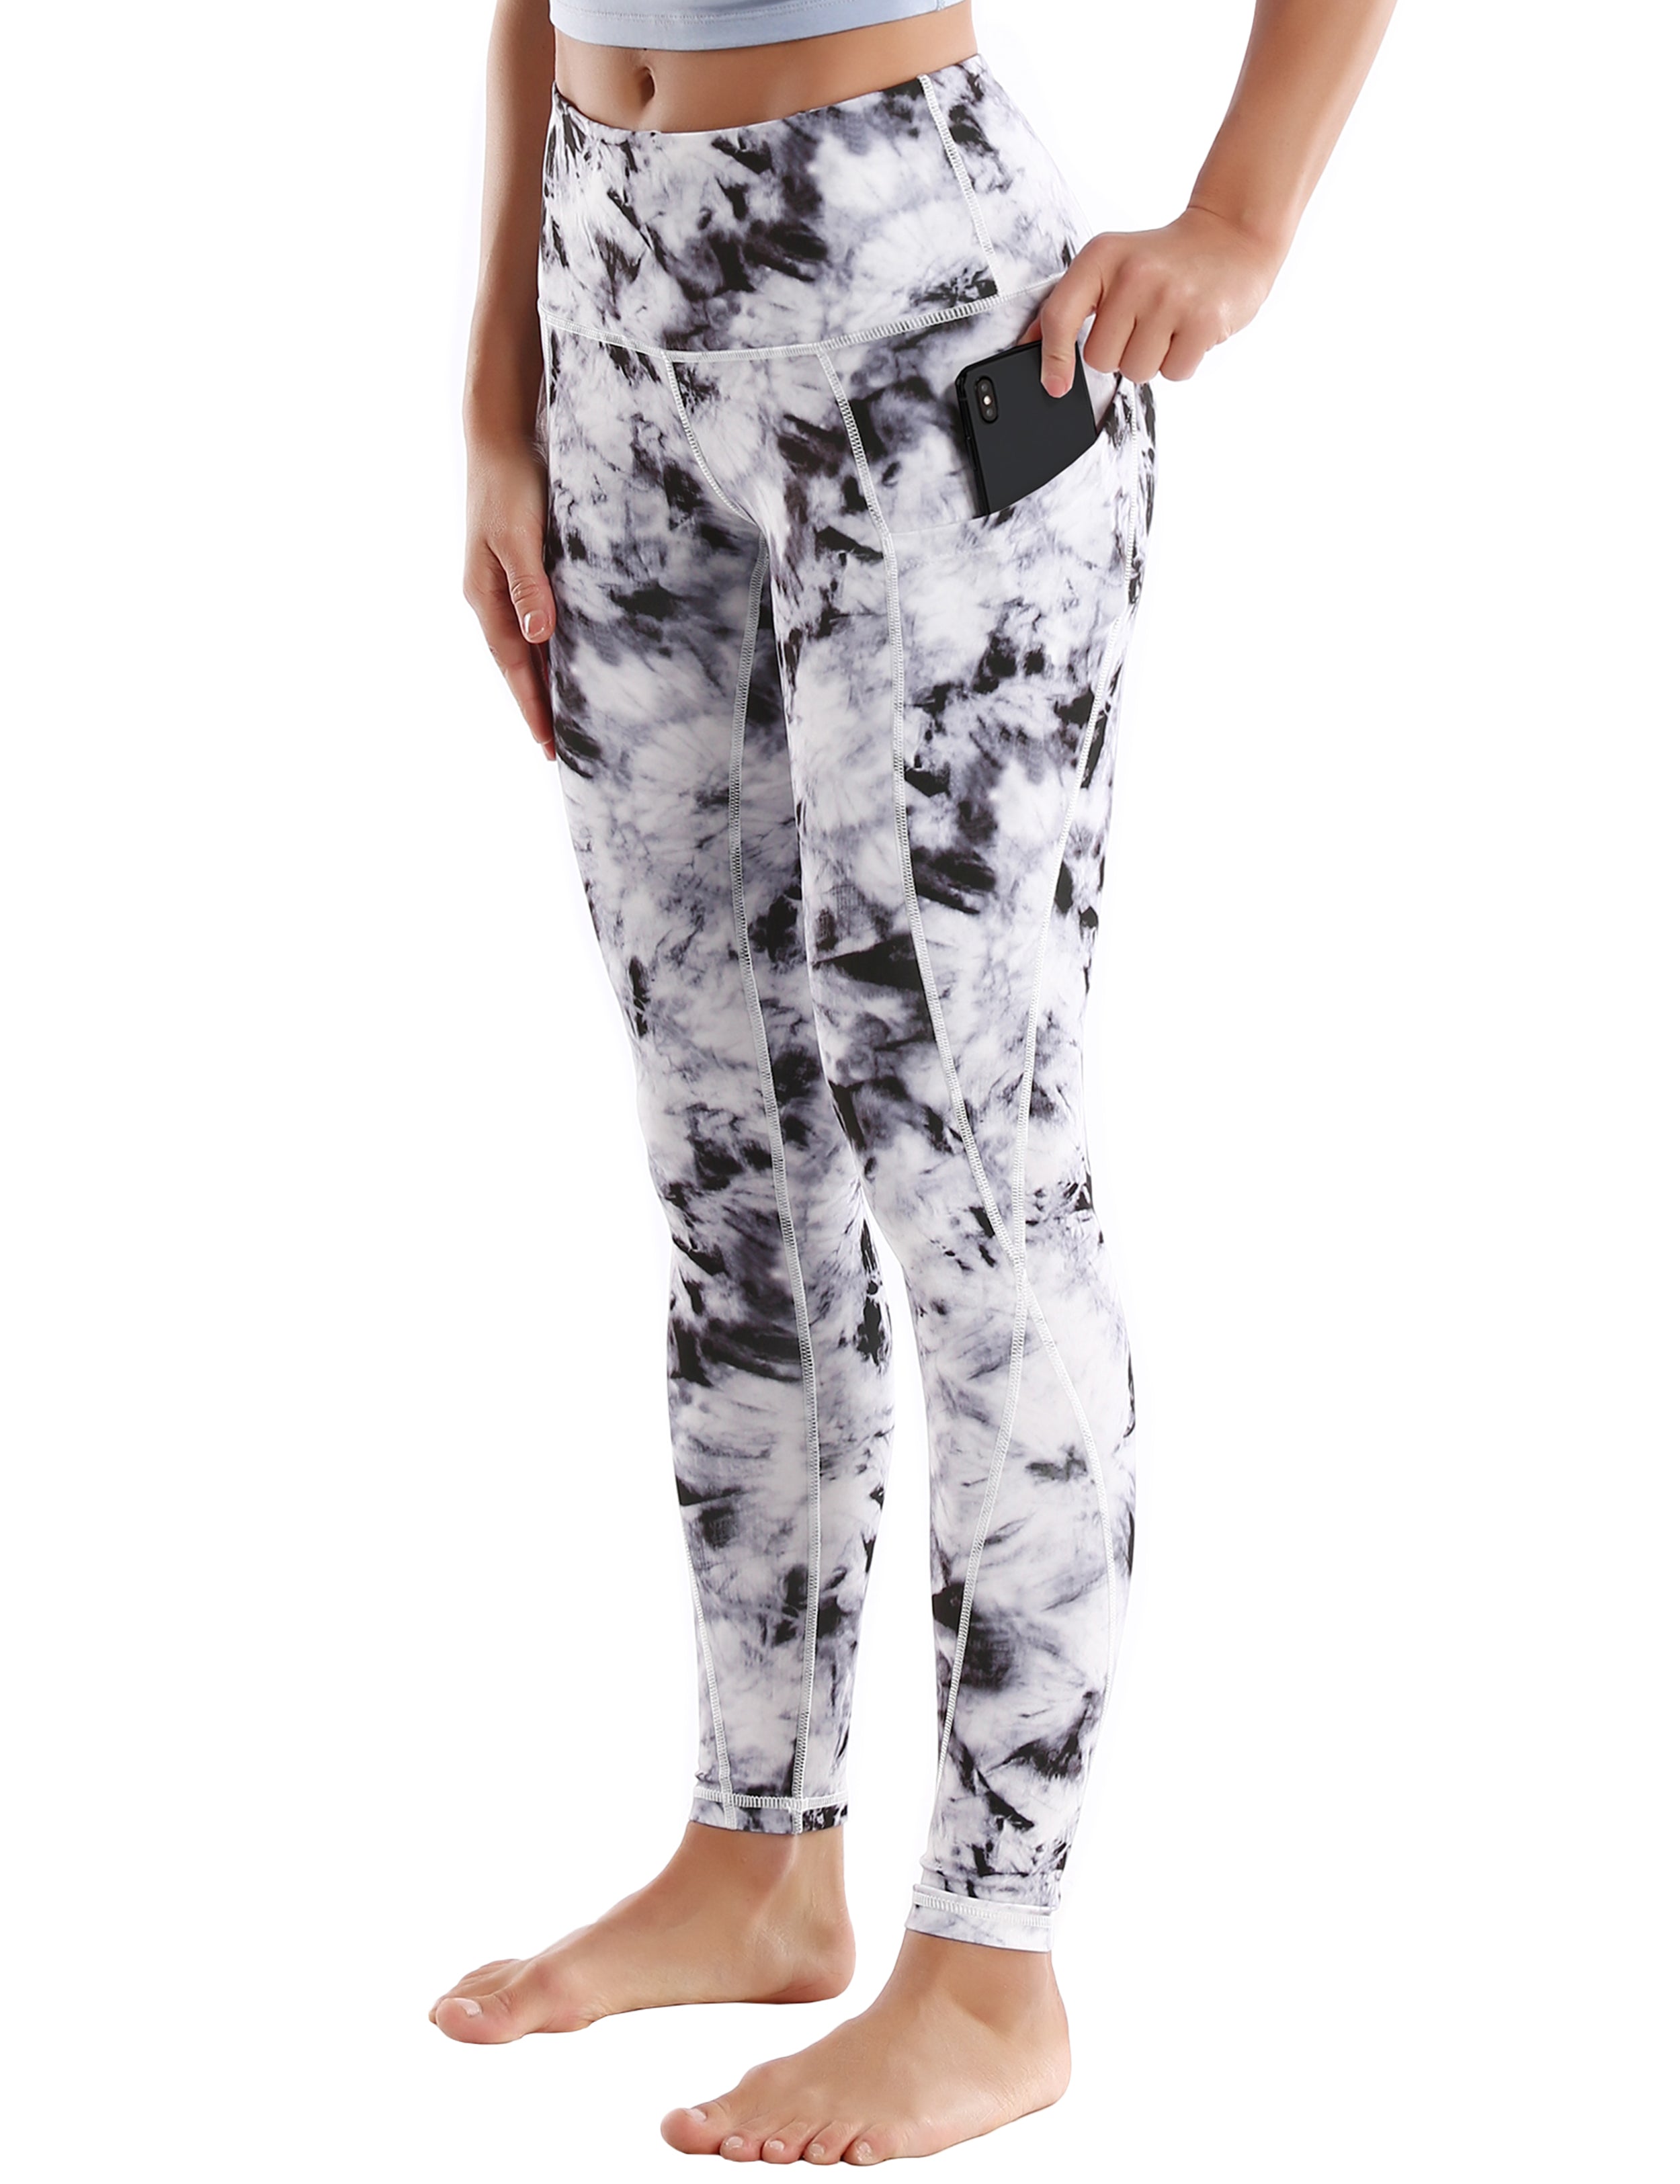 High Waist Side Pockets yogastudio Pants blackdandelion 78%Polyester/22%Spandex Fabric doesn't attract lint easily 4-way stretch No see-through Moisture-wicking Tummy control Inner pocket